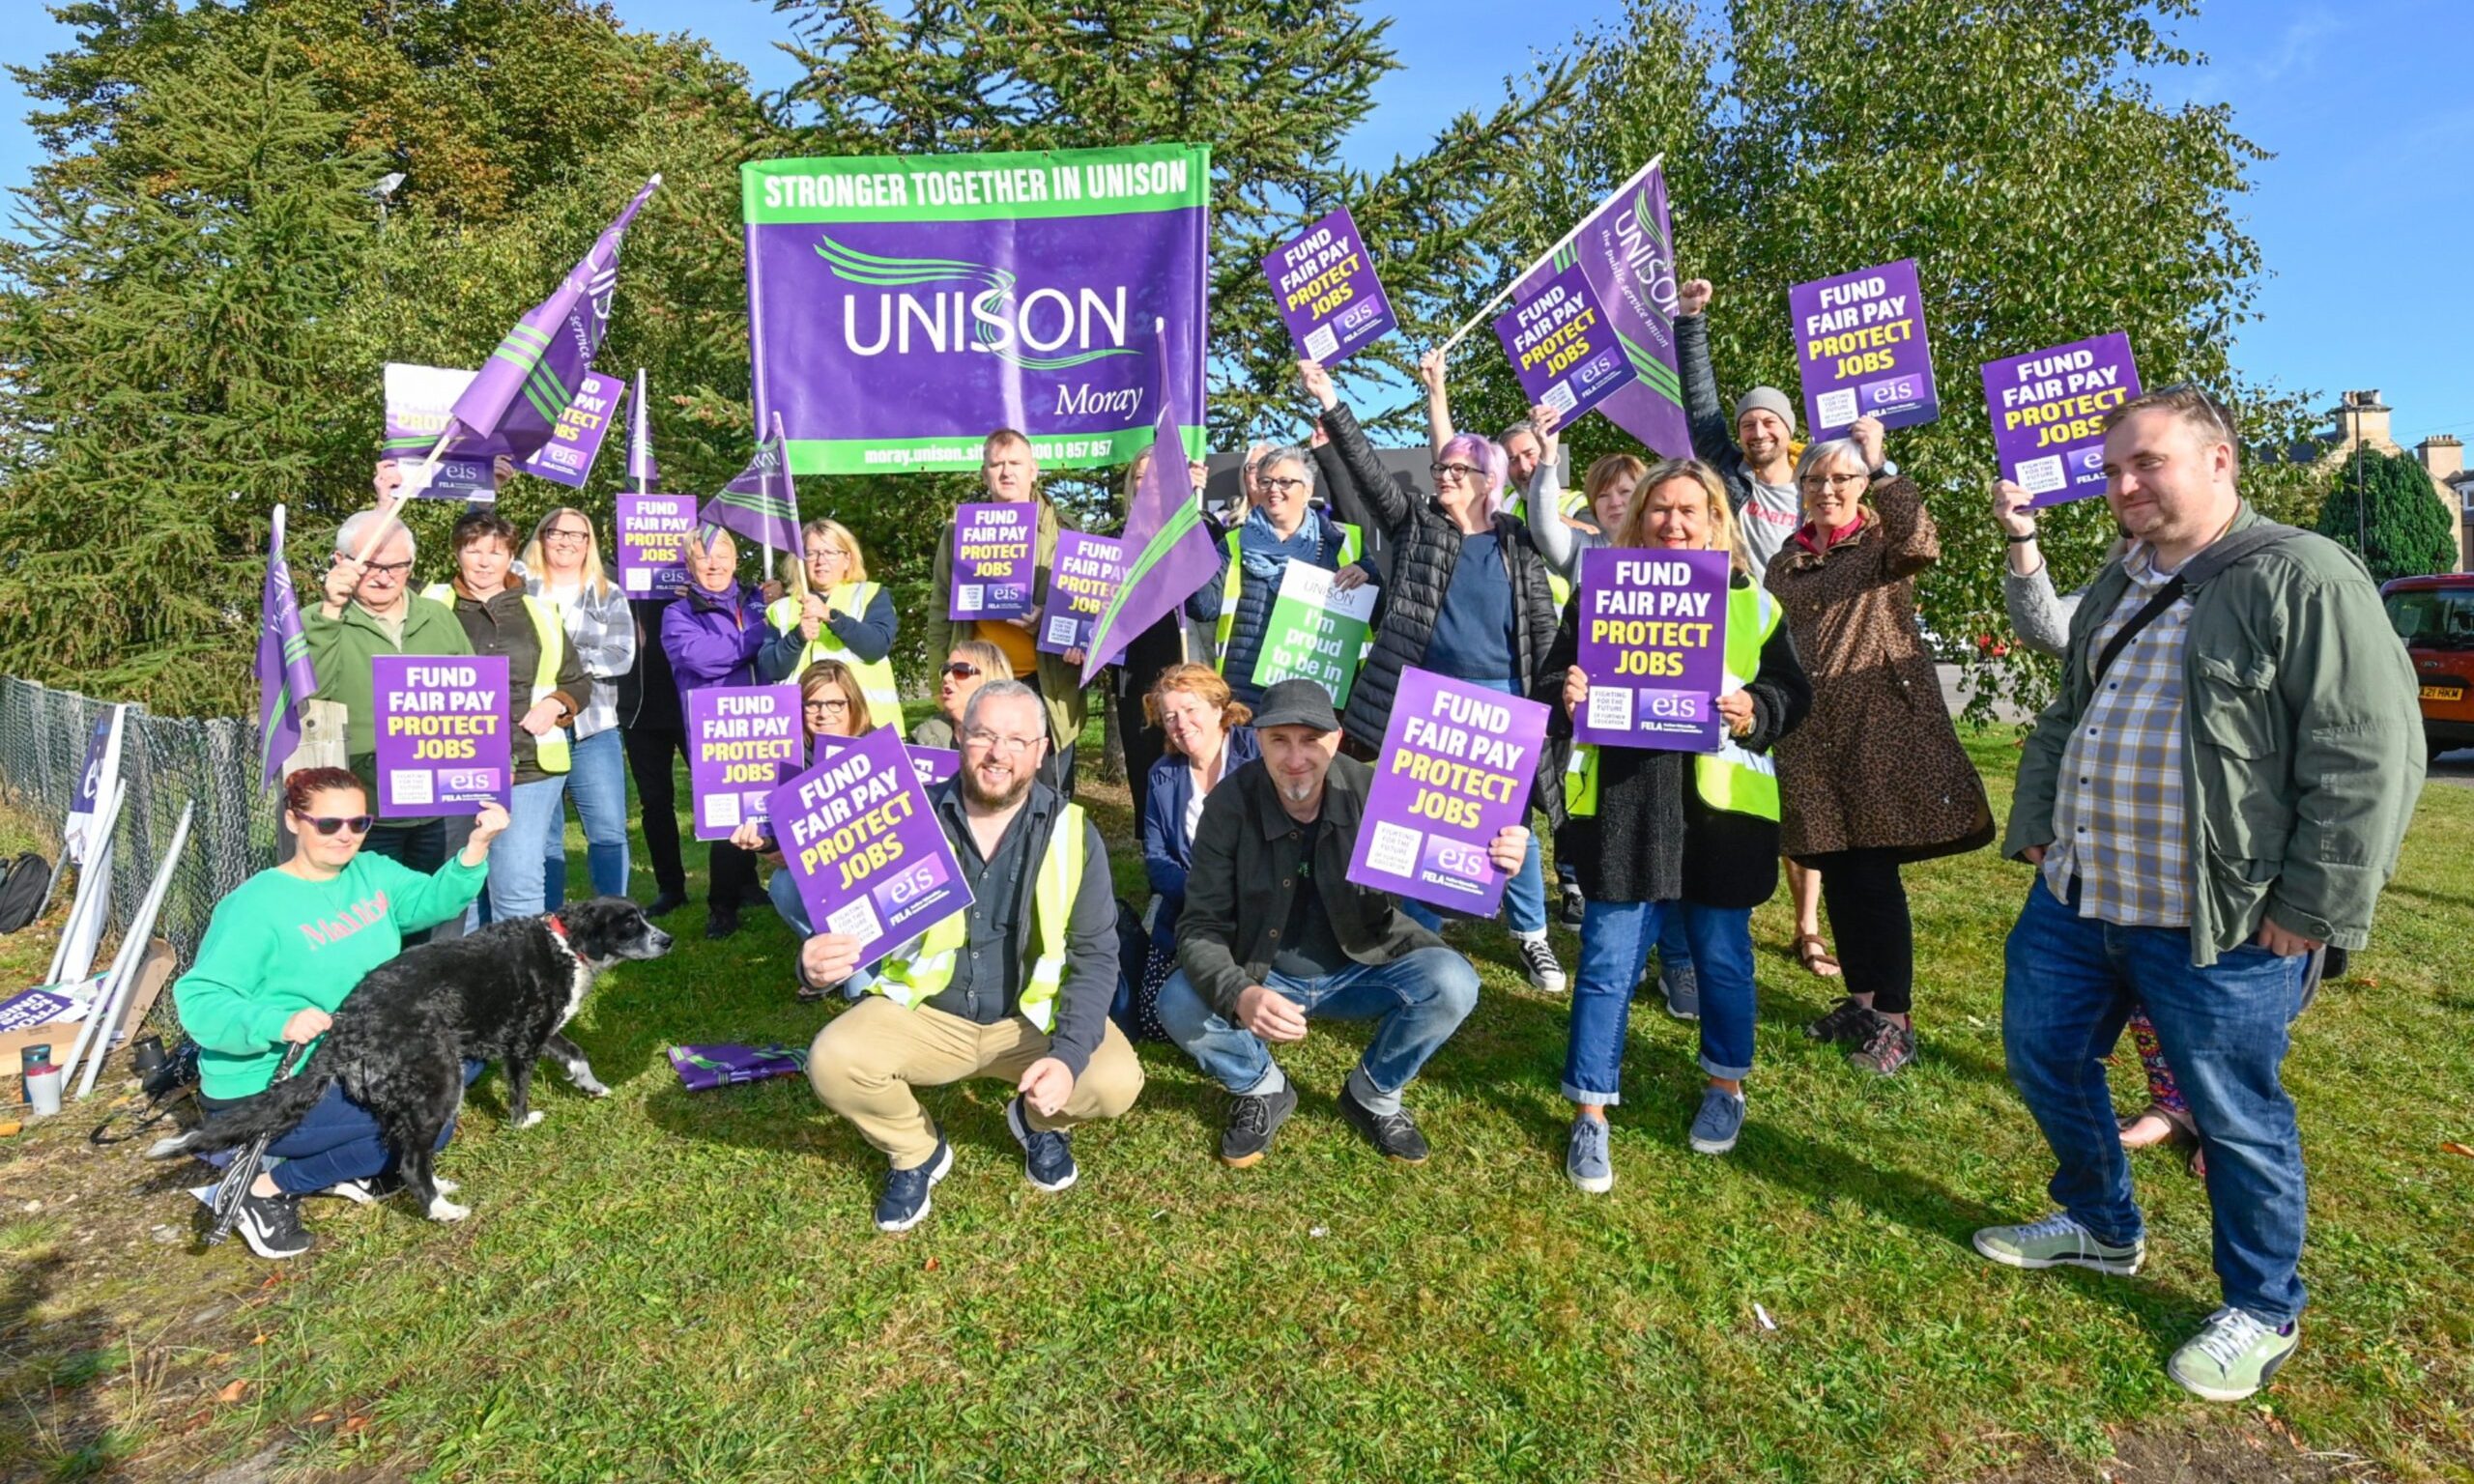 Moray UHI staff on picket line waving Unison flags and banners. 